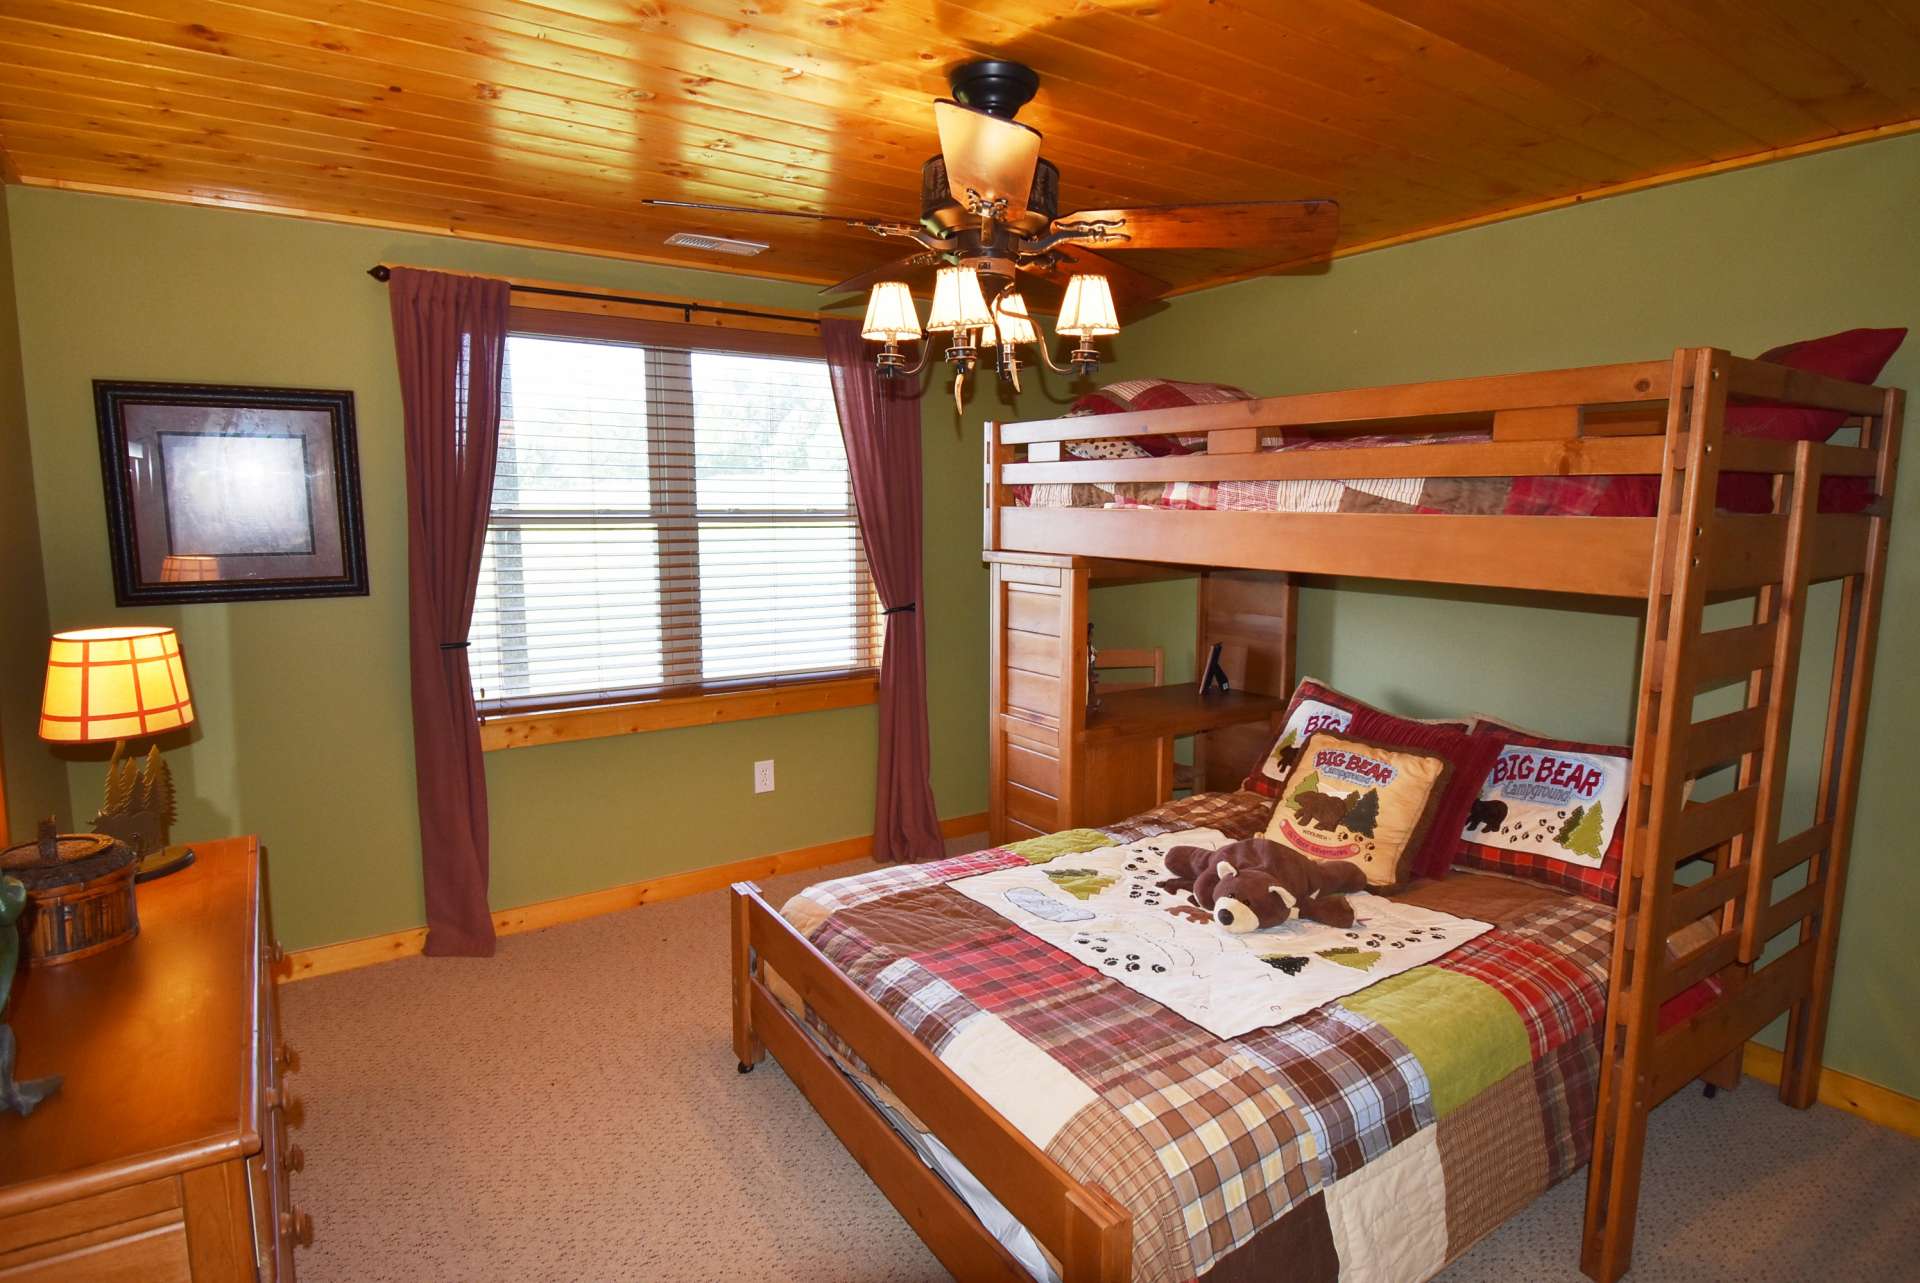 Your overnight guests will love their space and privacy in the lower level.